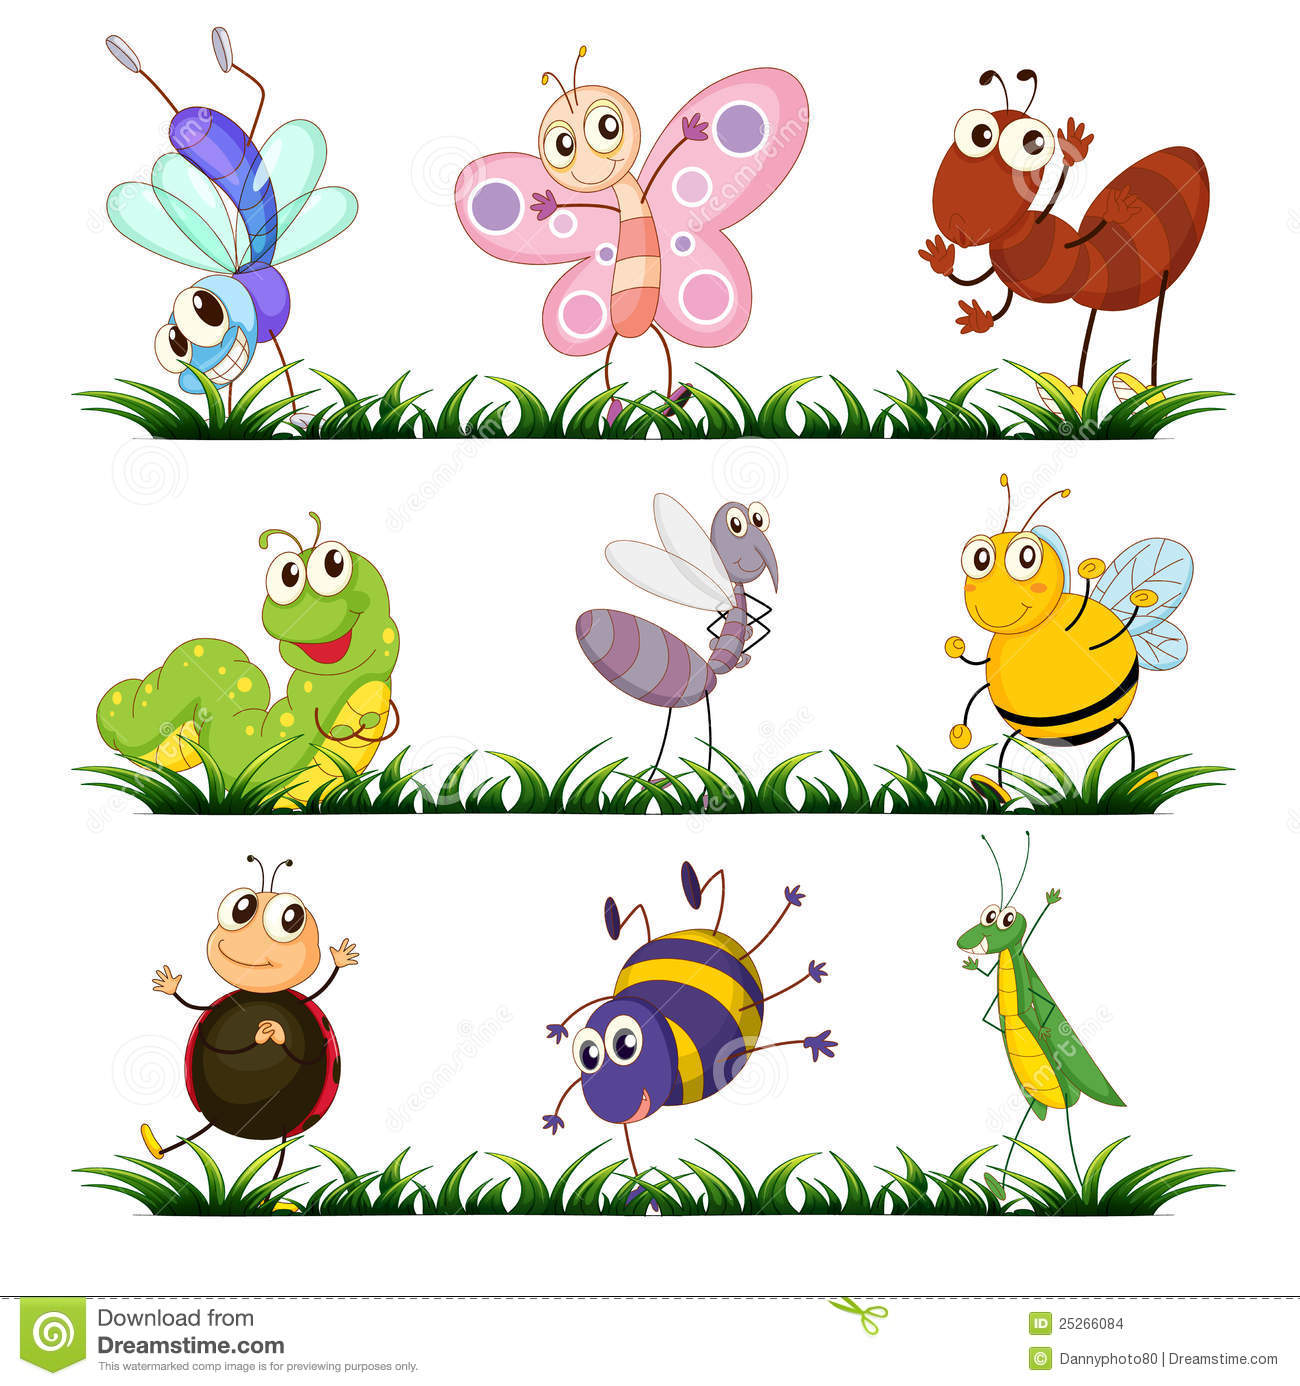 Insects Clip Art - Getbellhop